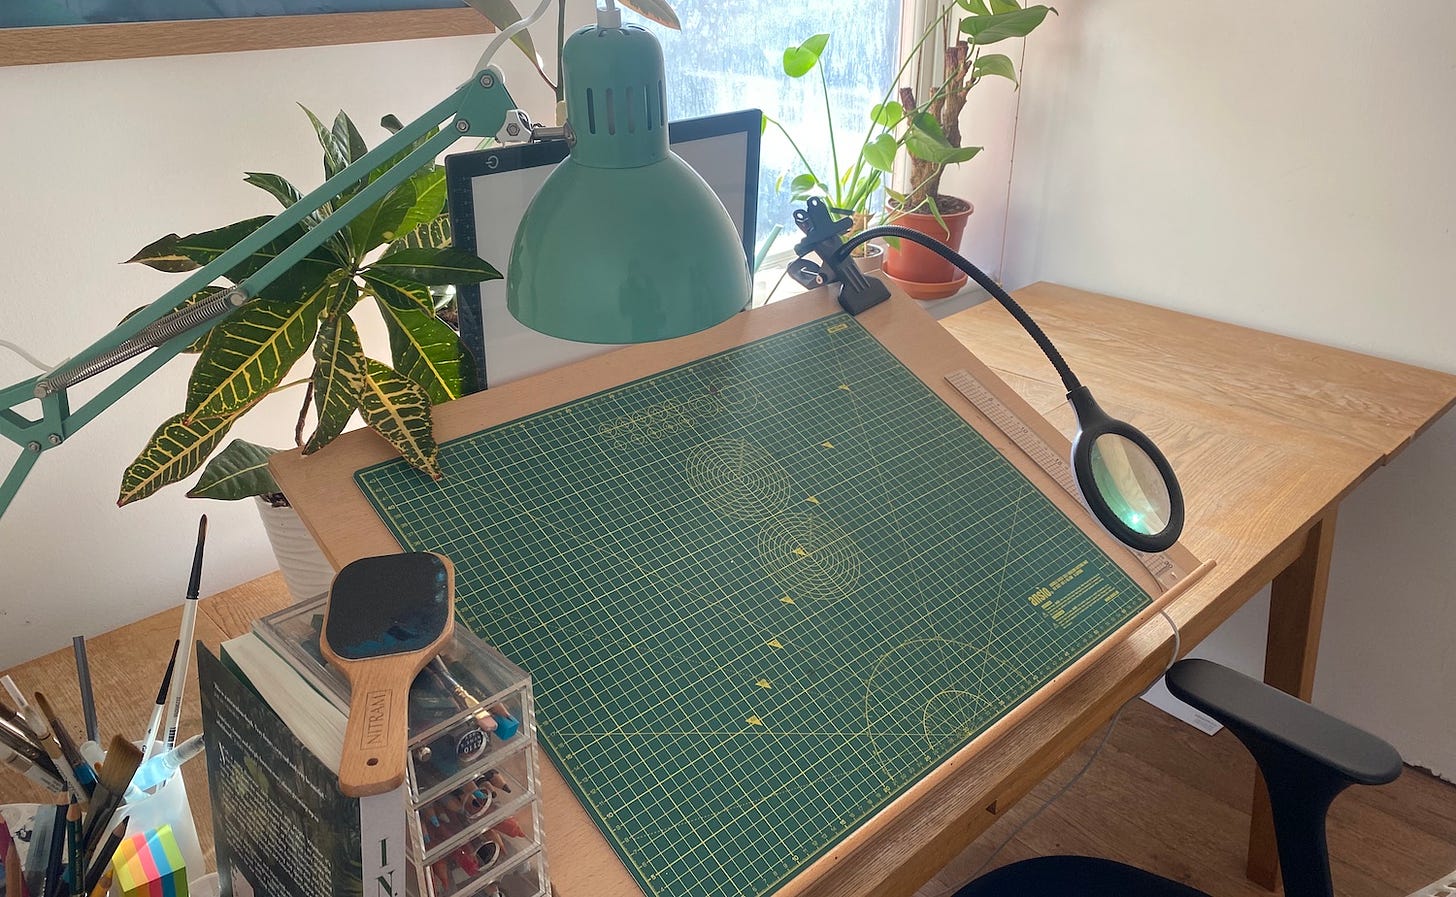 A photograph of Adam's workspace, featuring a drawing board, pencils, paintbrushes, plants and a lightbox